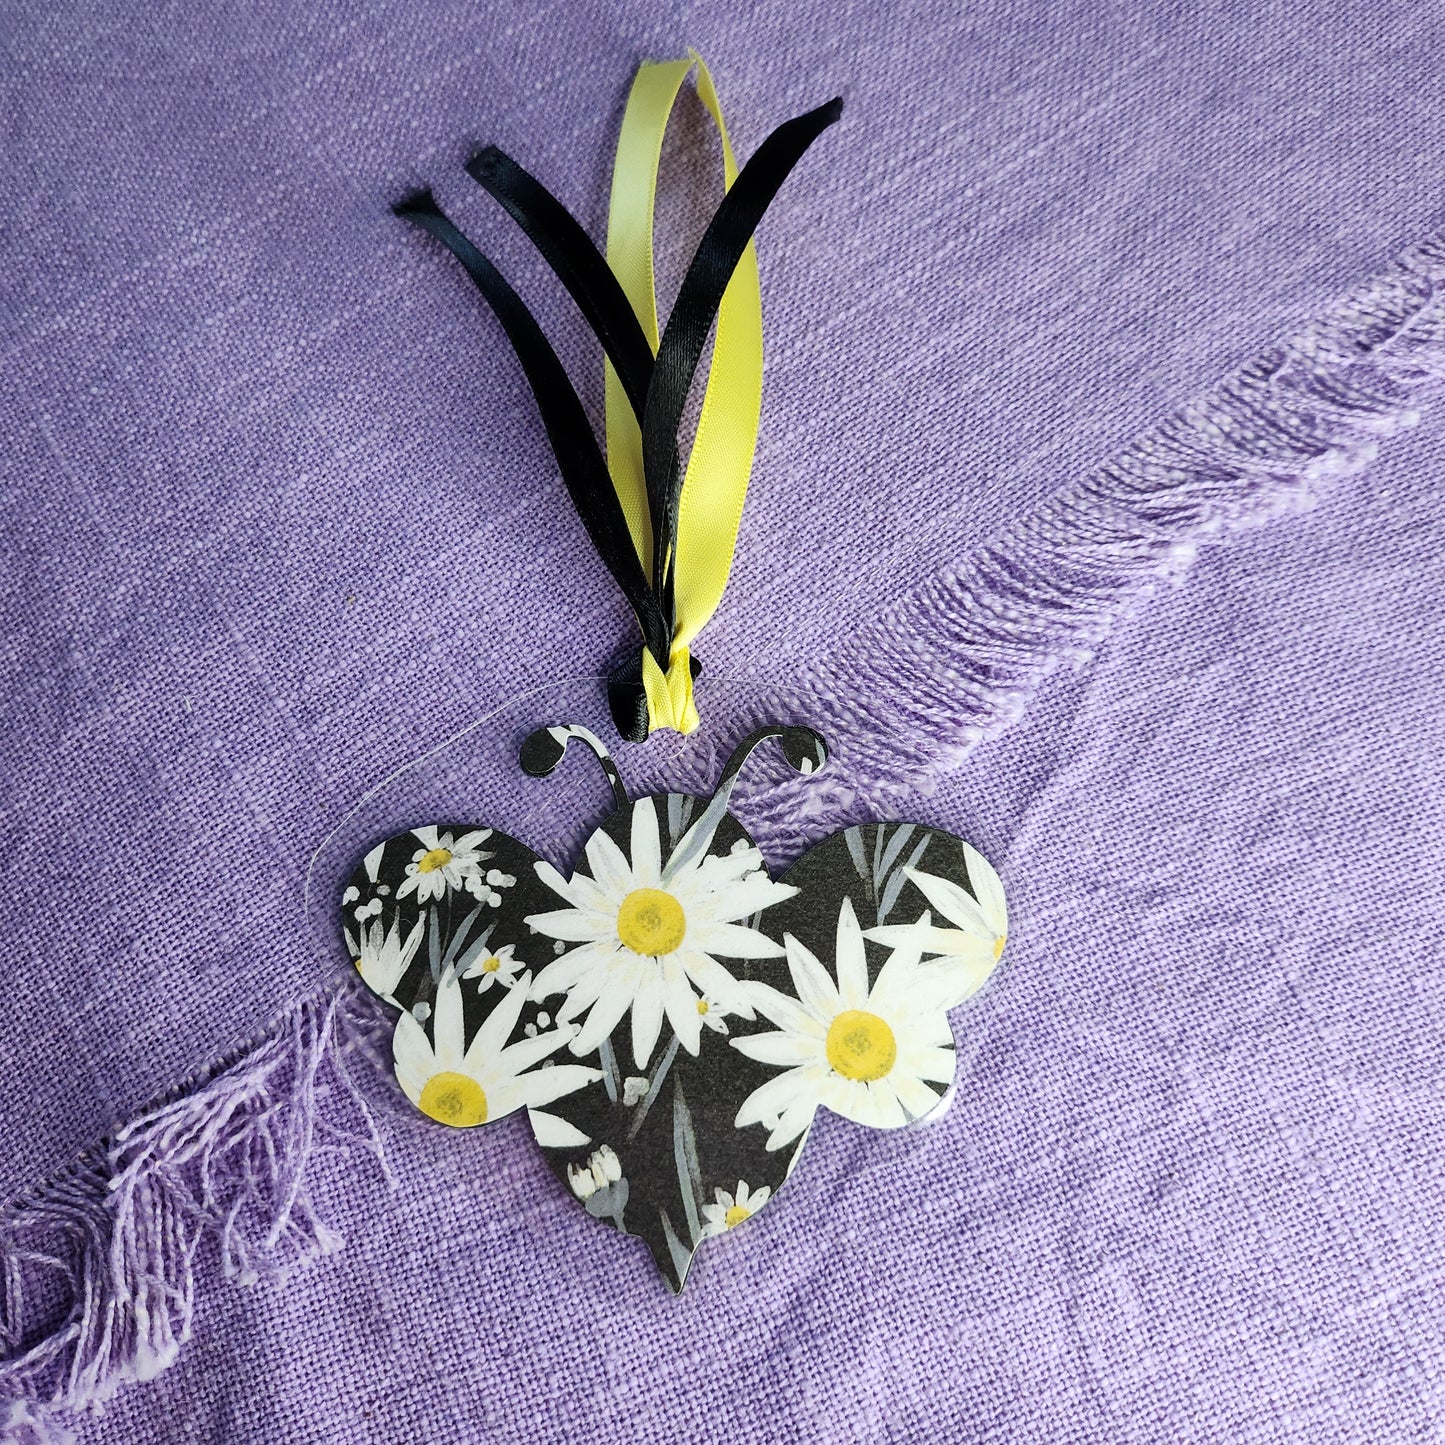 Healing Takes Time Bookmark, Mental Health Bookmark, Daisy Bumble Bee Bookmark,